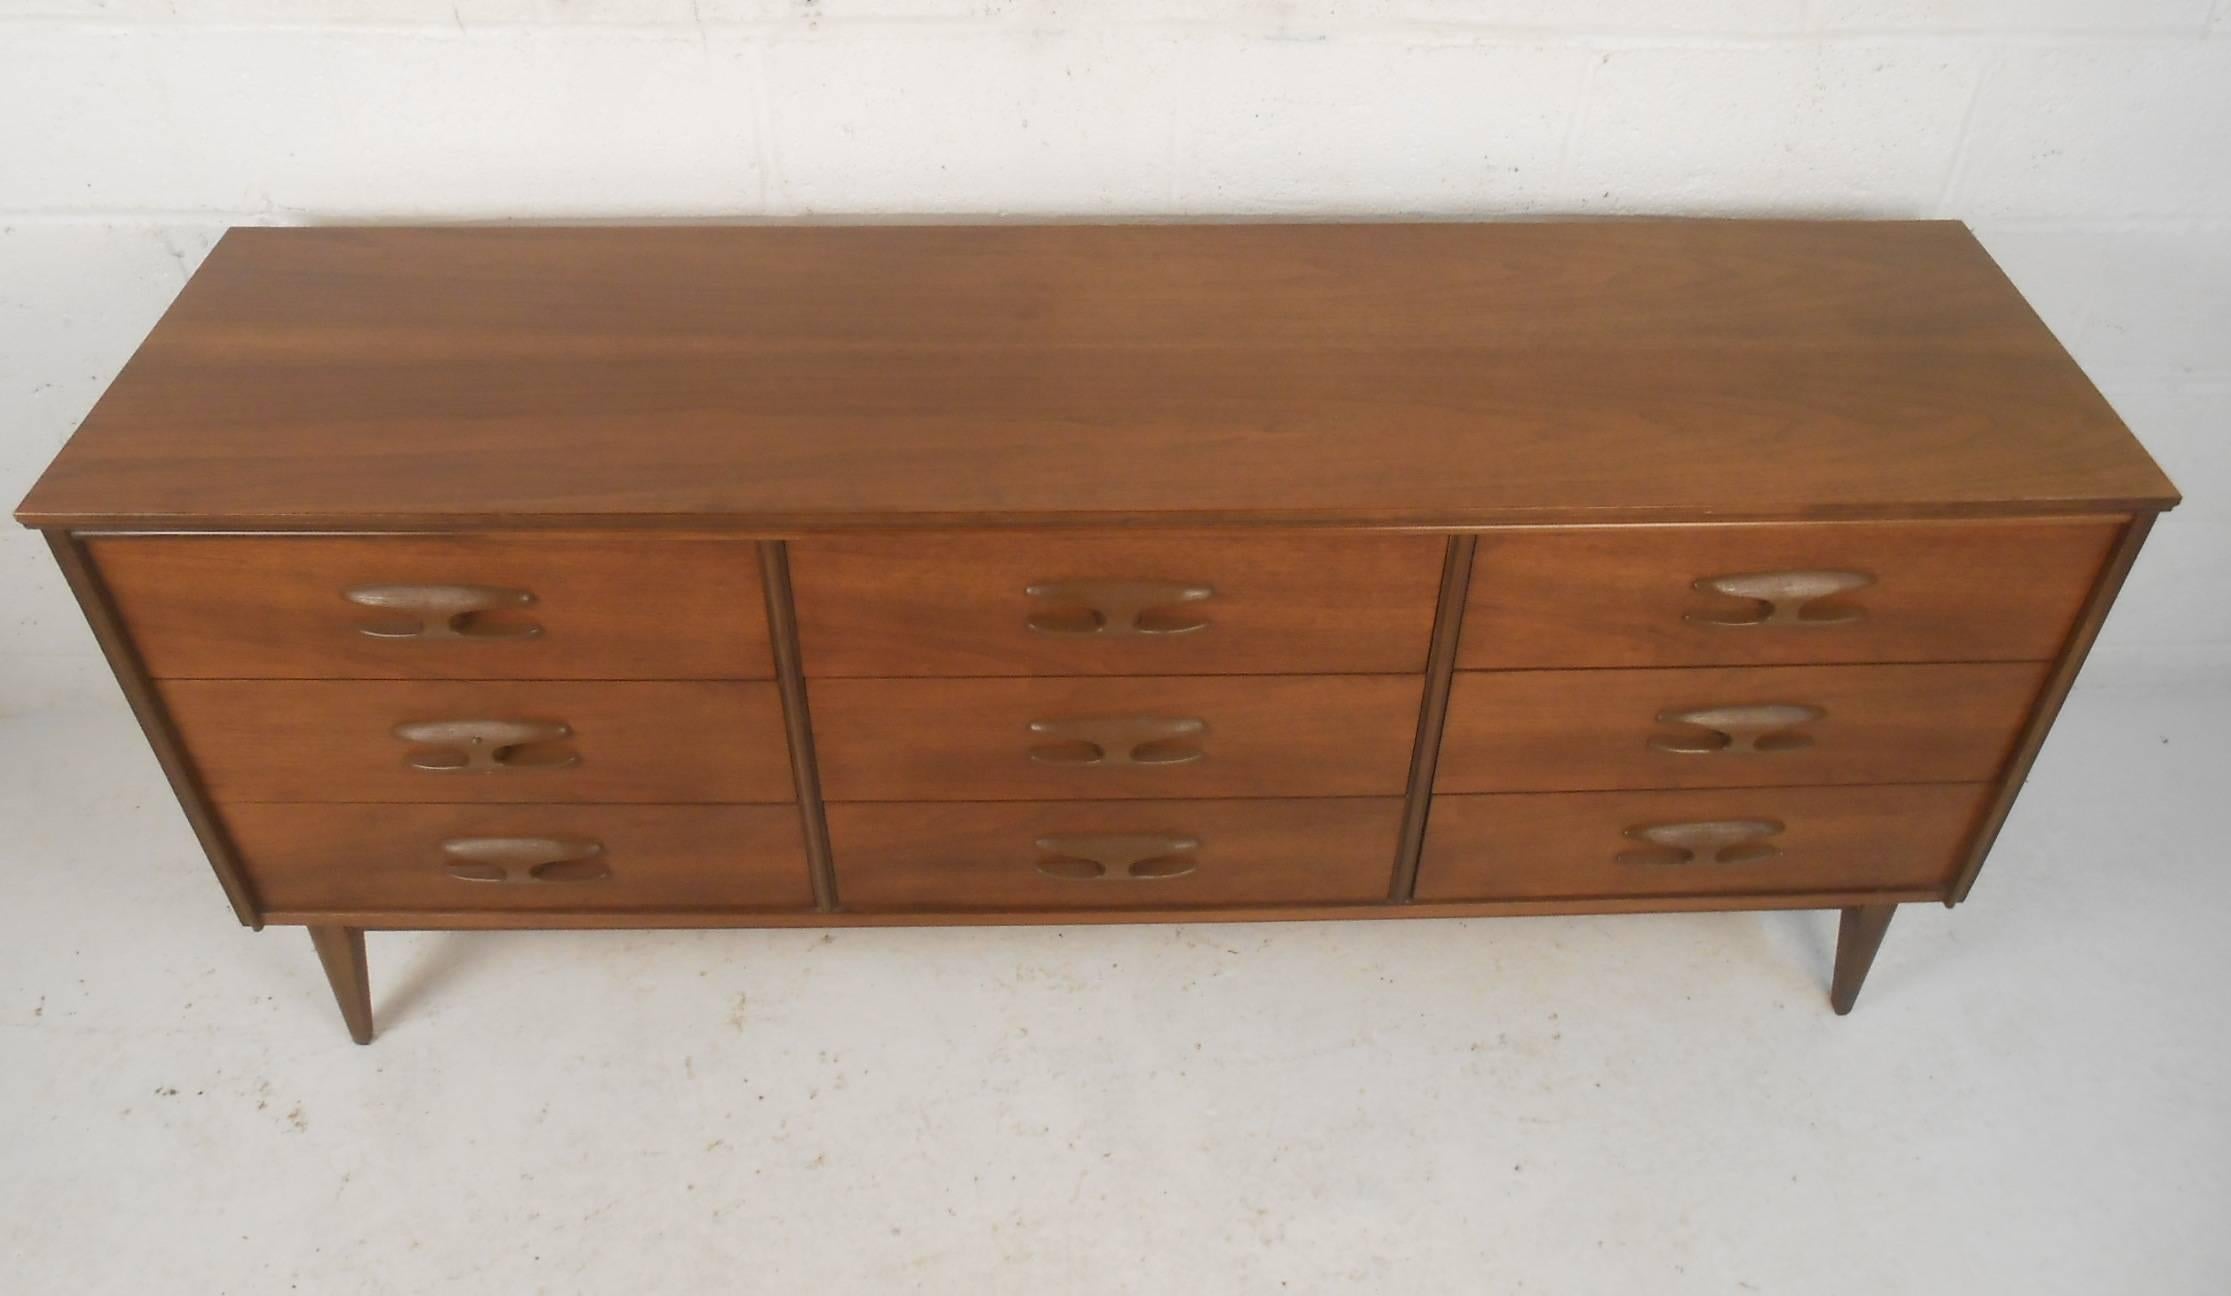 This beautiful vintage modern dresser features unusual sculpted pulls on each of its nine hefty drawers. This unique case piece provides plenty of room for storage without sacrificing style. The lovely dark walnut wood grain and splayed legs add to